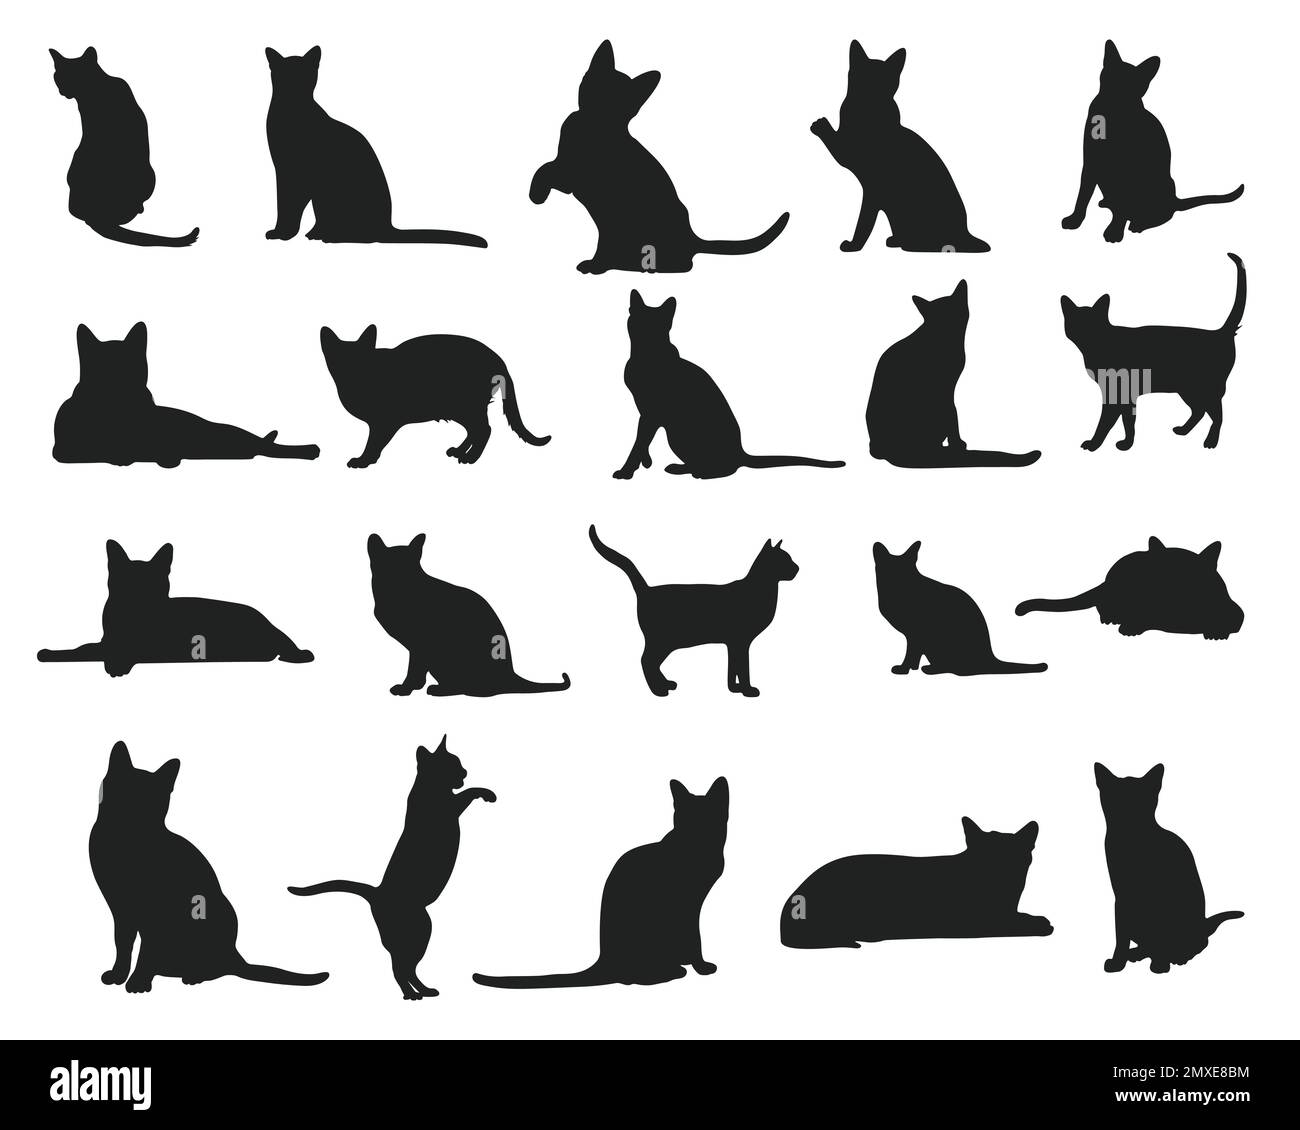 Korat cat animal silhouettes, Cats silhouette collection. Stock Vector